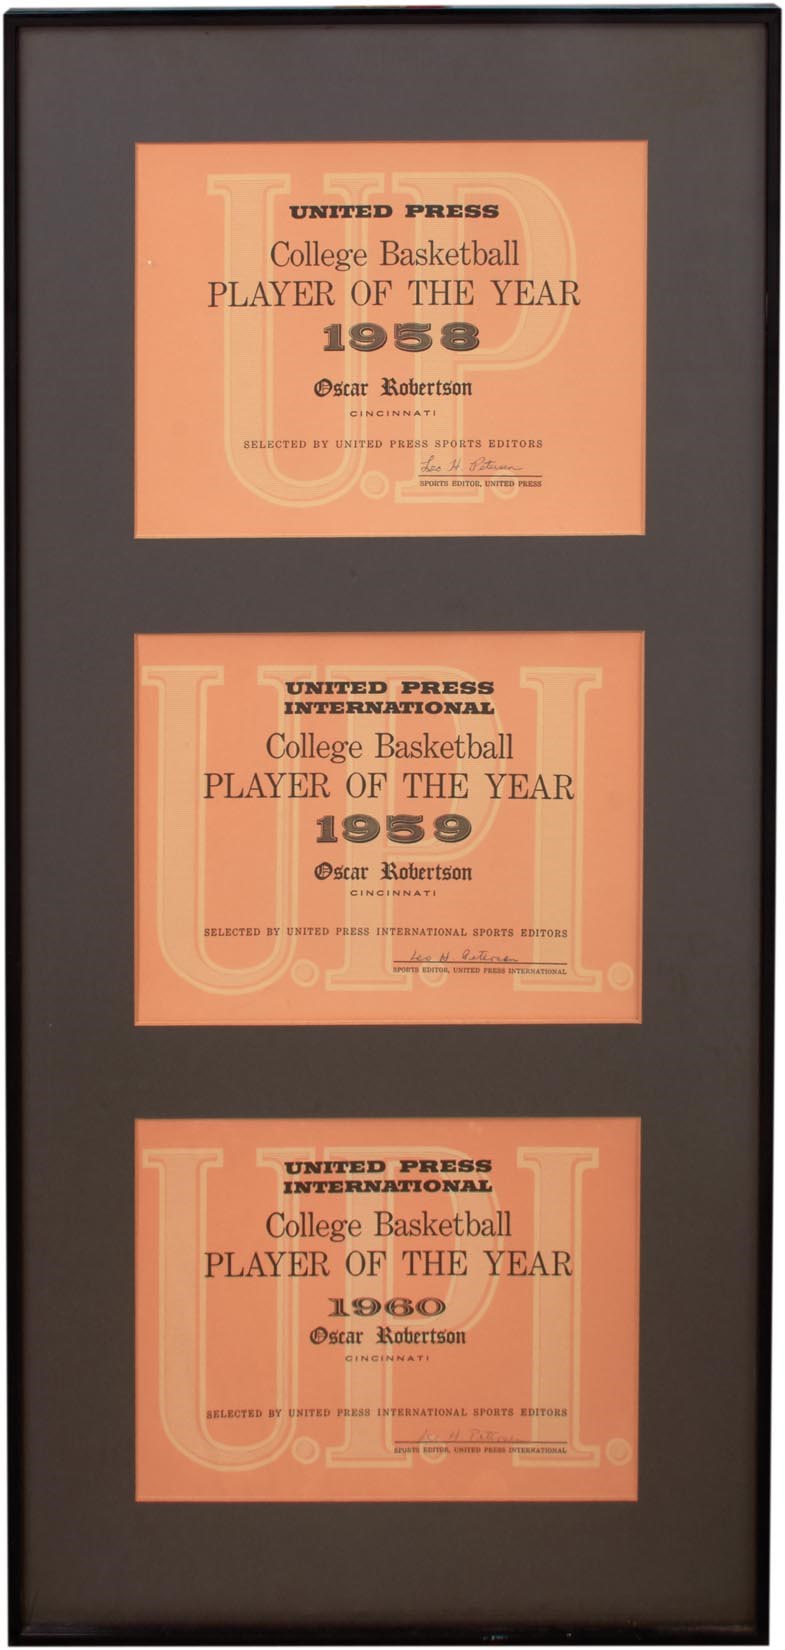 1958, 1959 and 1960 Oscar Robertson UPI College Player of the Year Awards